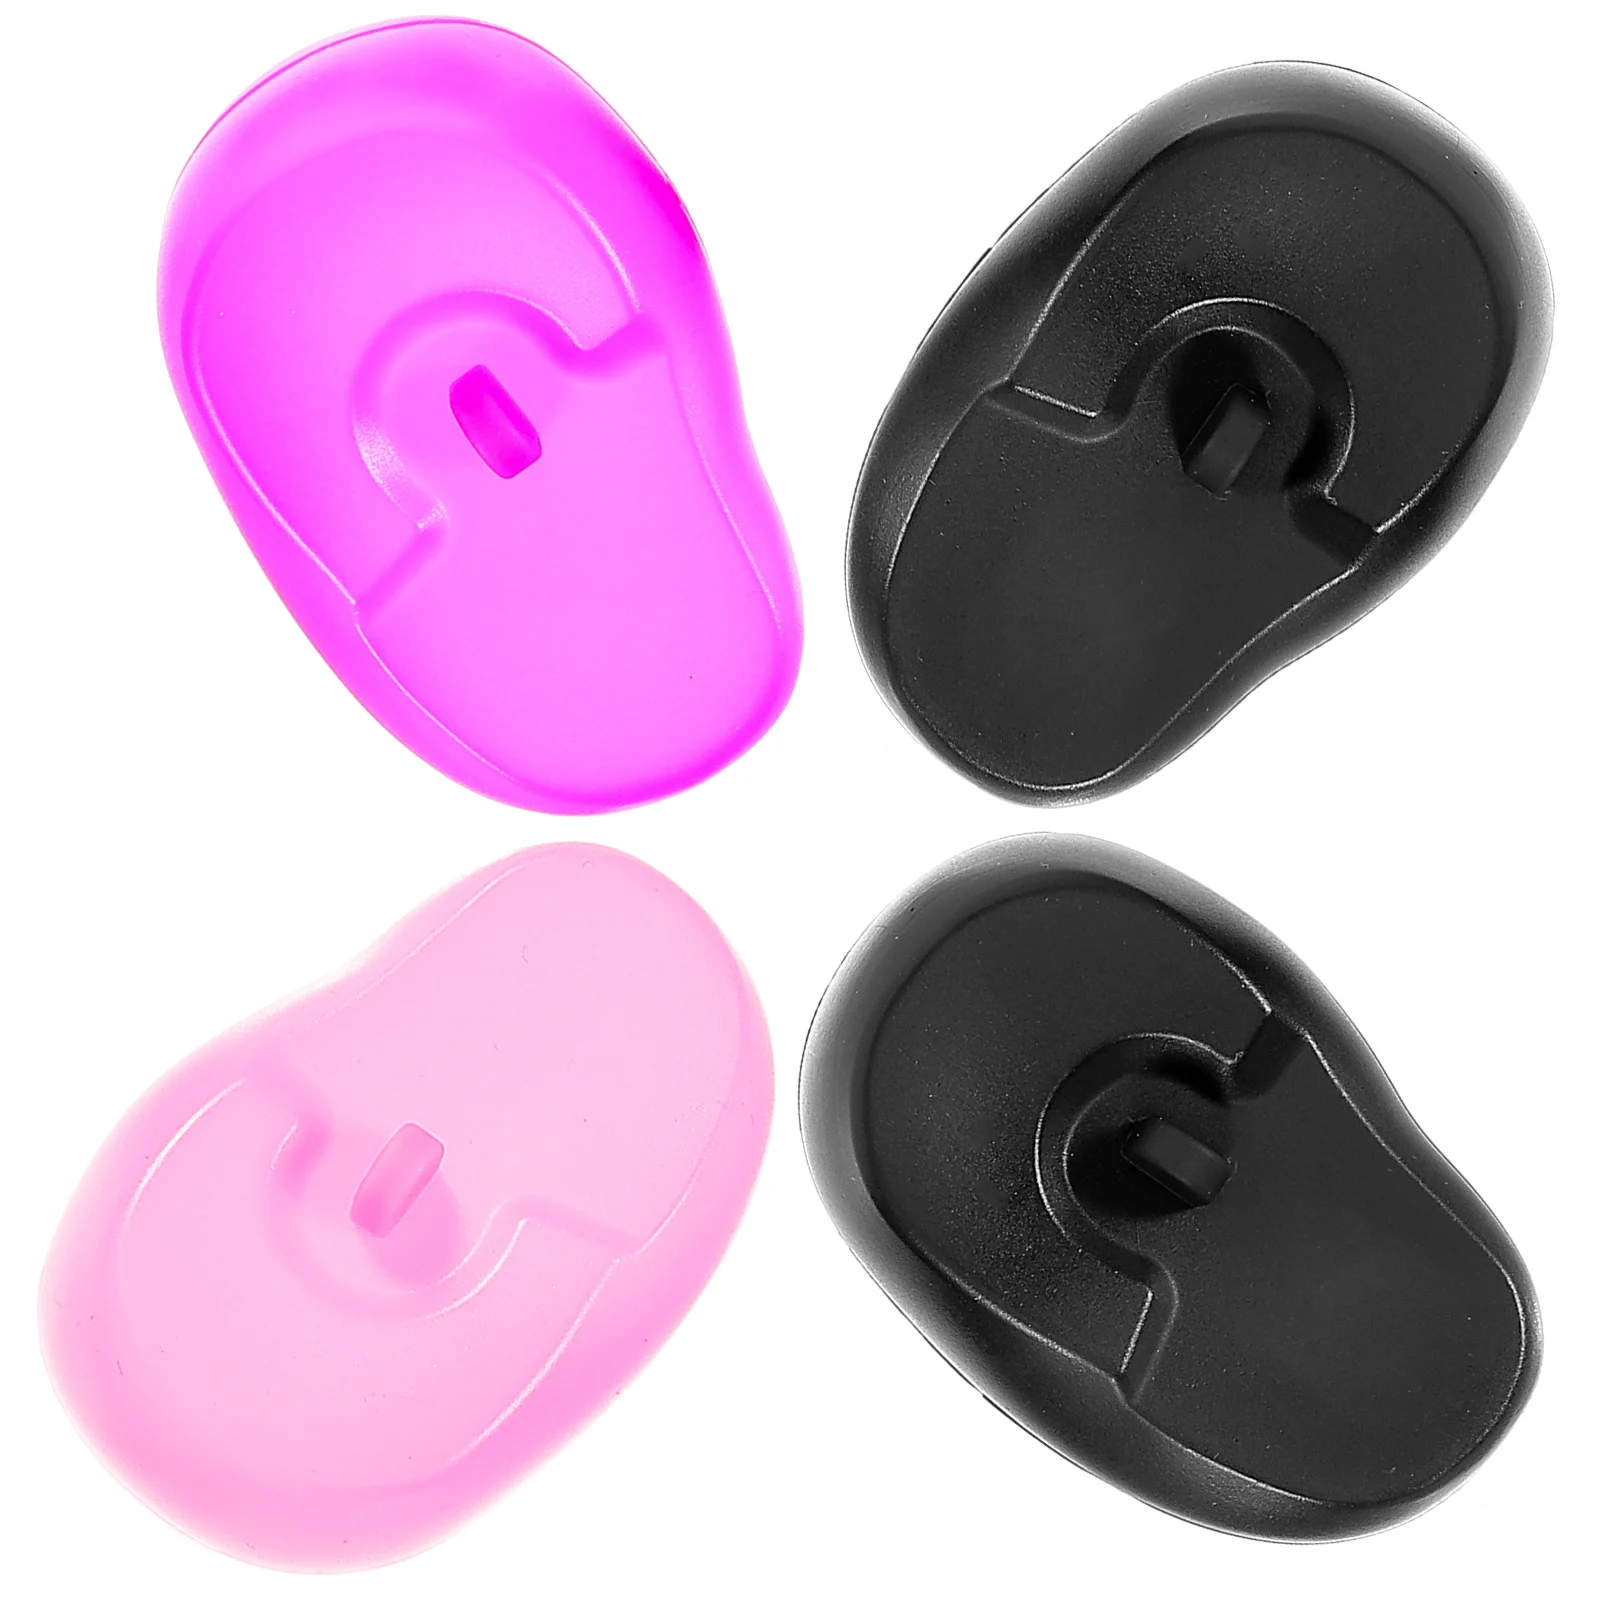 

4 Pcs Jet Black Hair Dye Earmuffs Dyeing Accessories Cover Caps Coloring Tab Covers Styling Dryer Silicone Protection Men Women